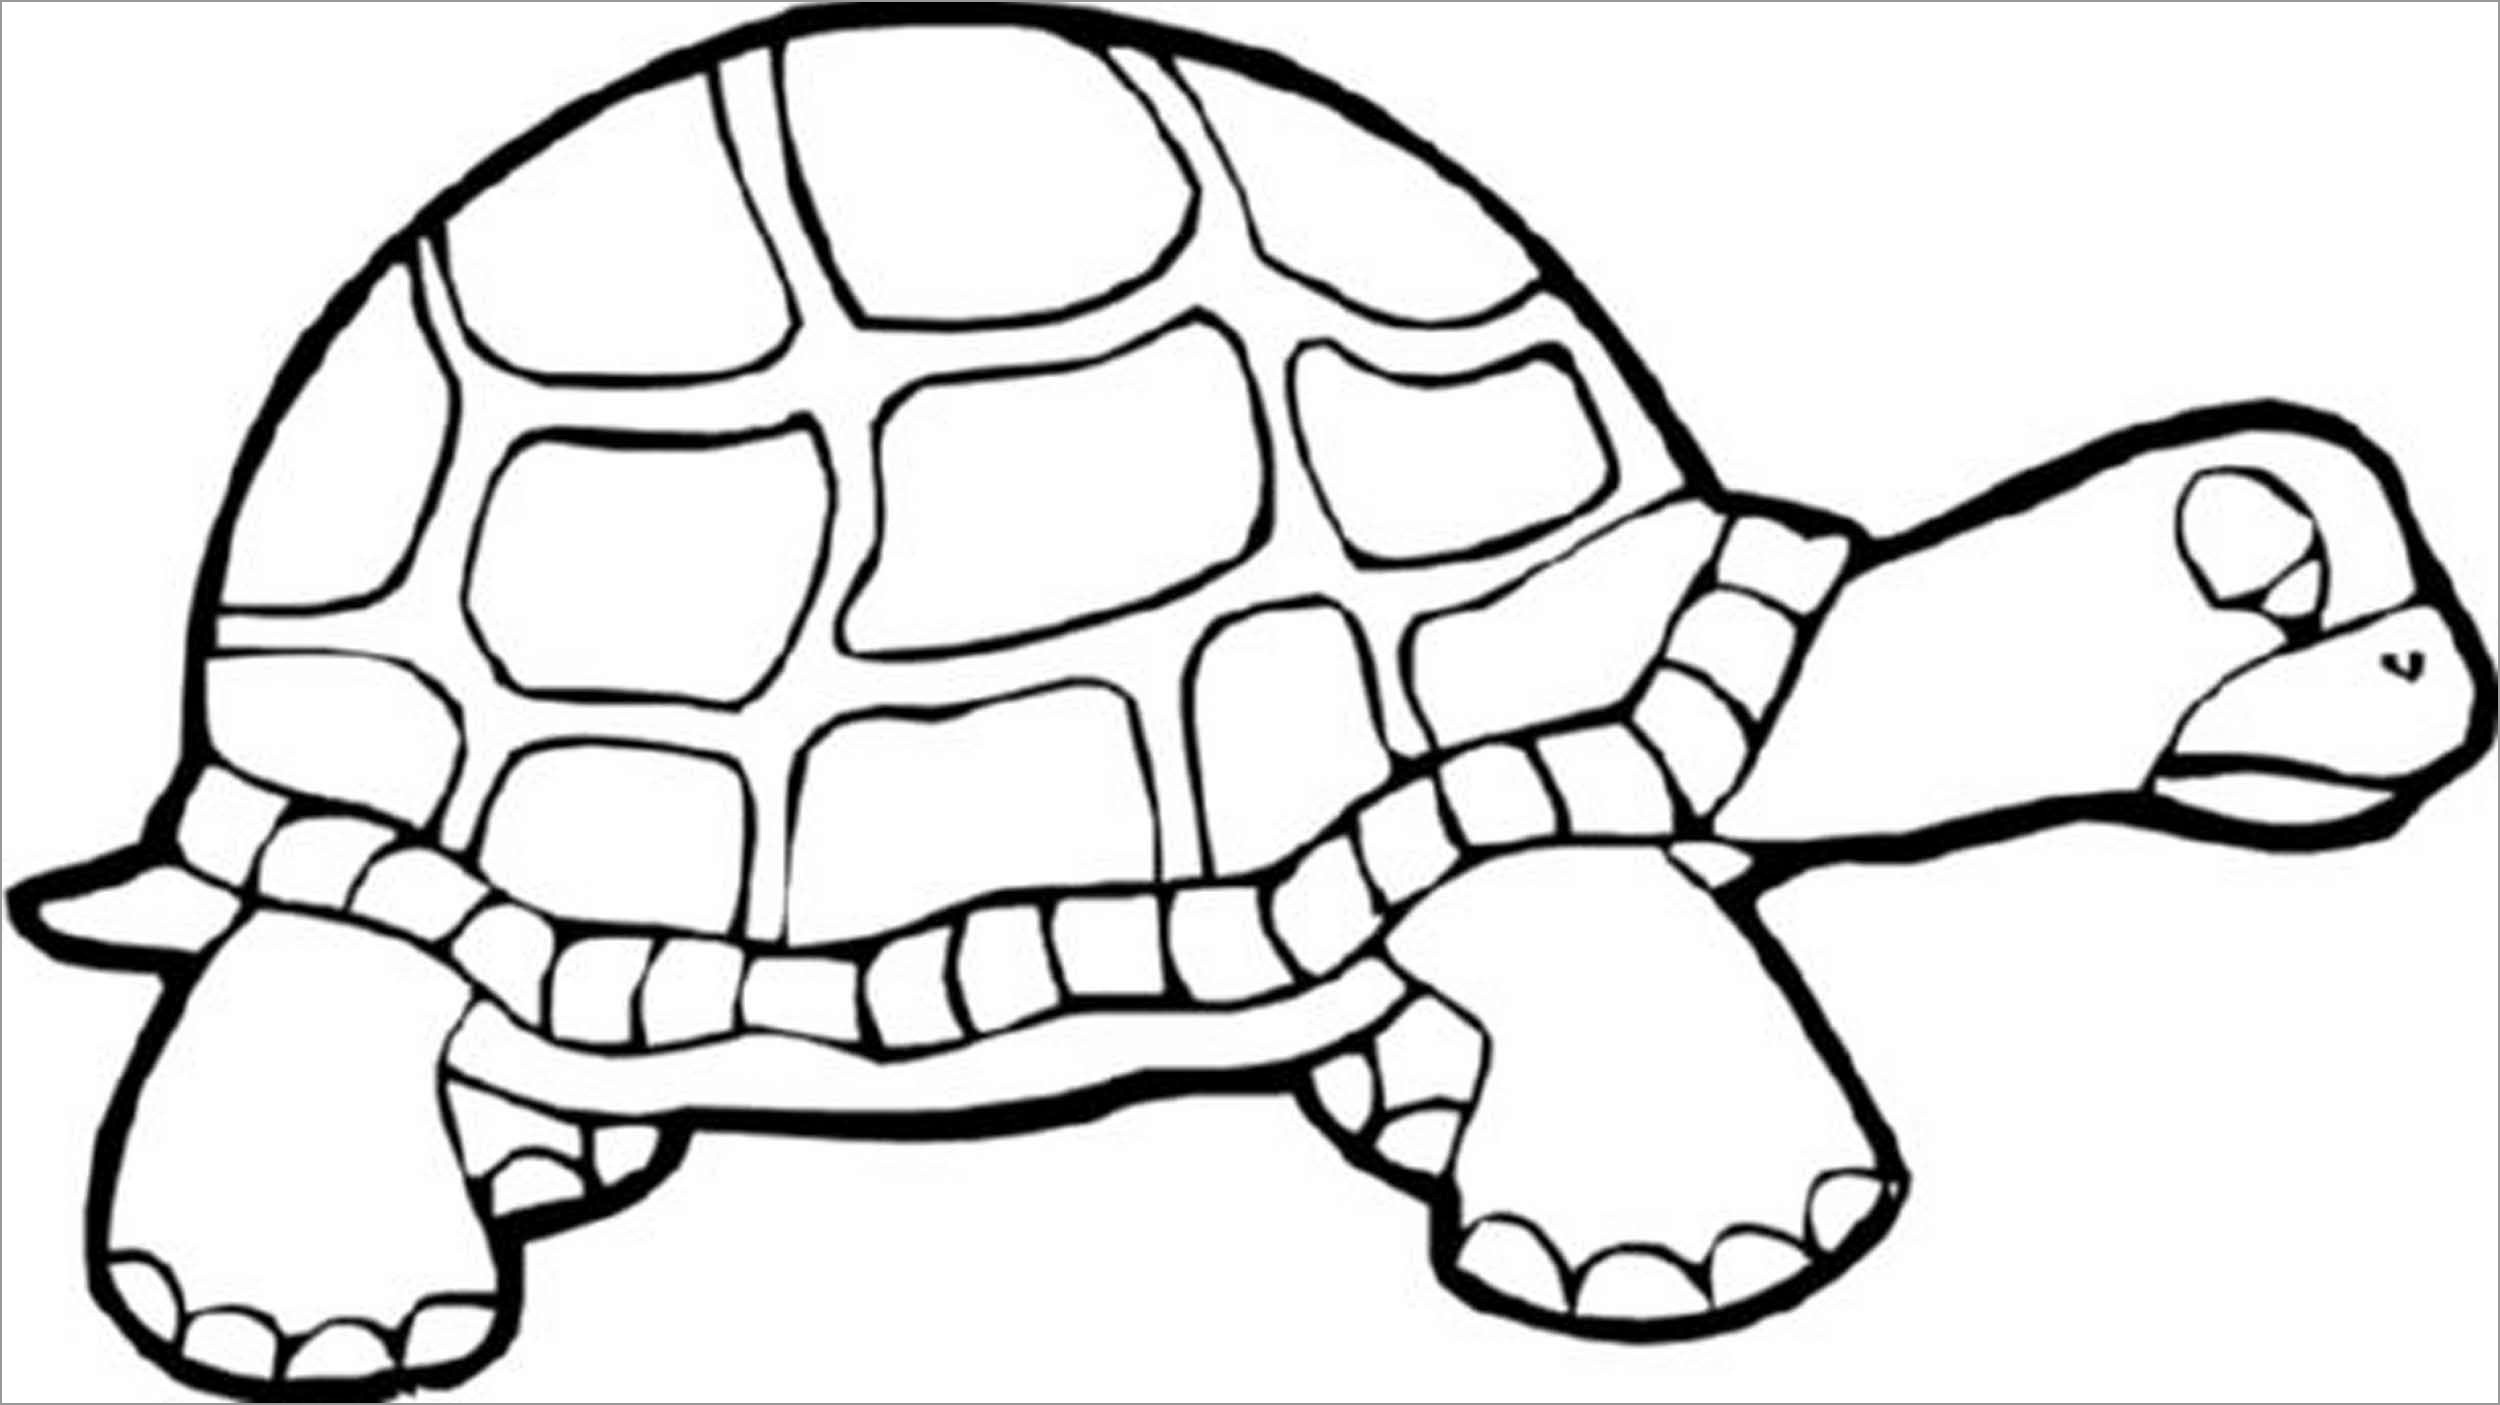 Free Printable Coloring Pages tortoise